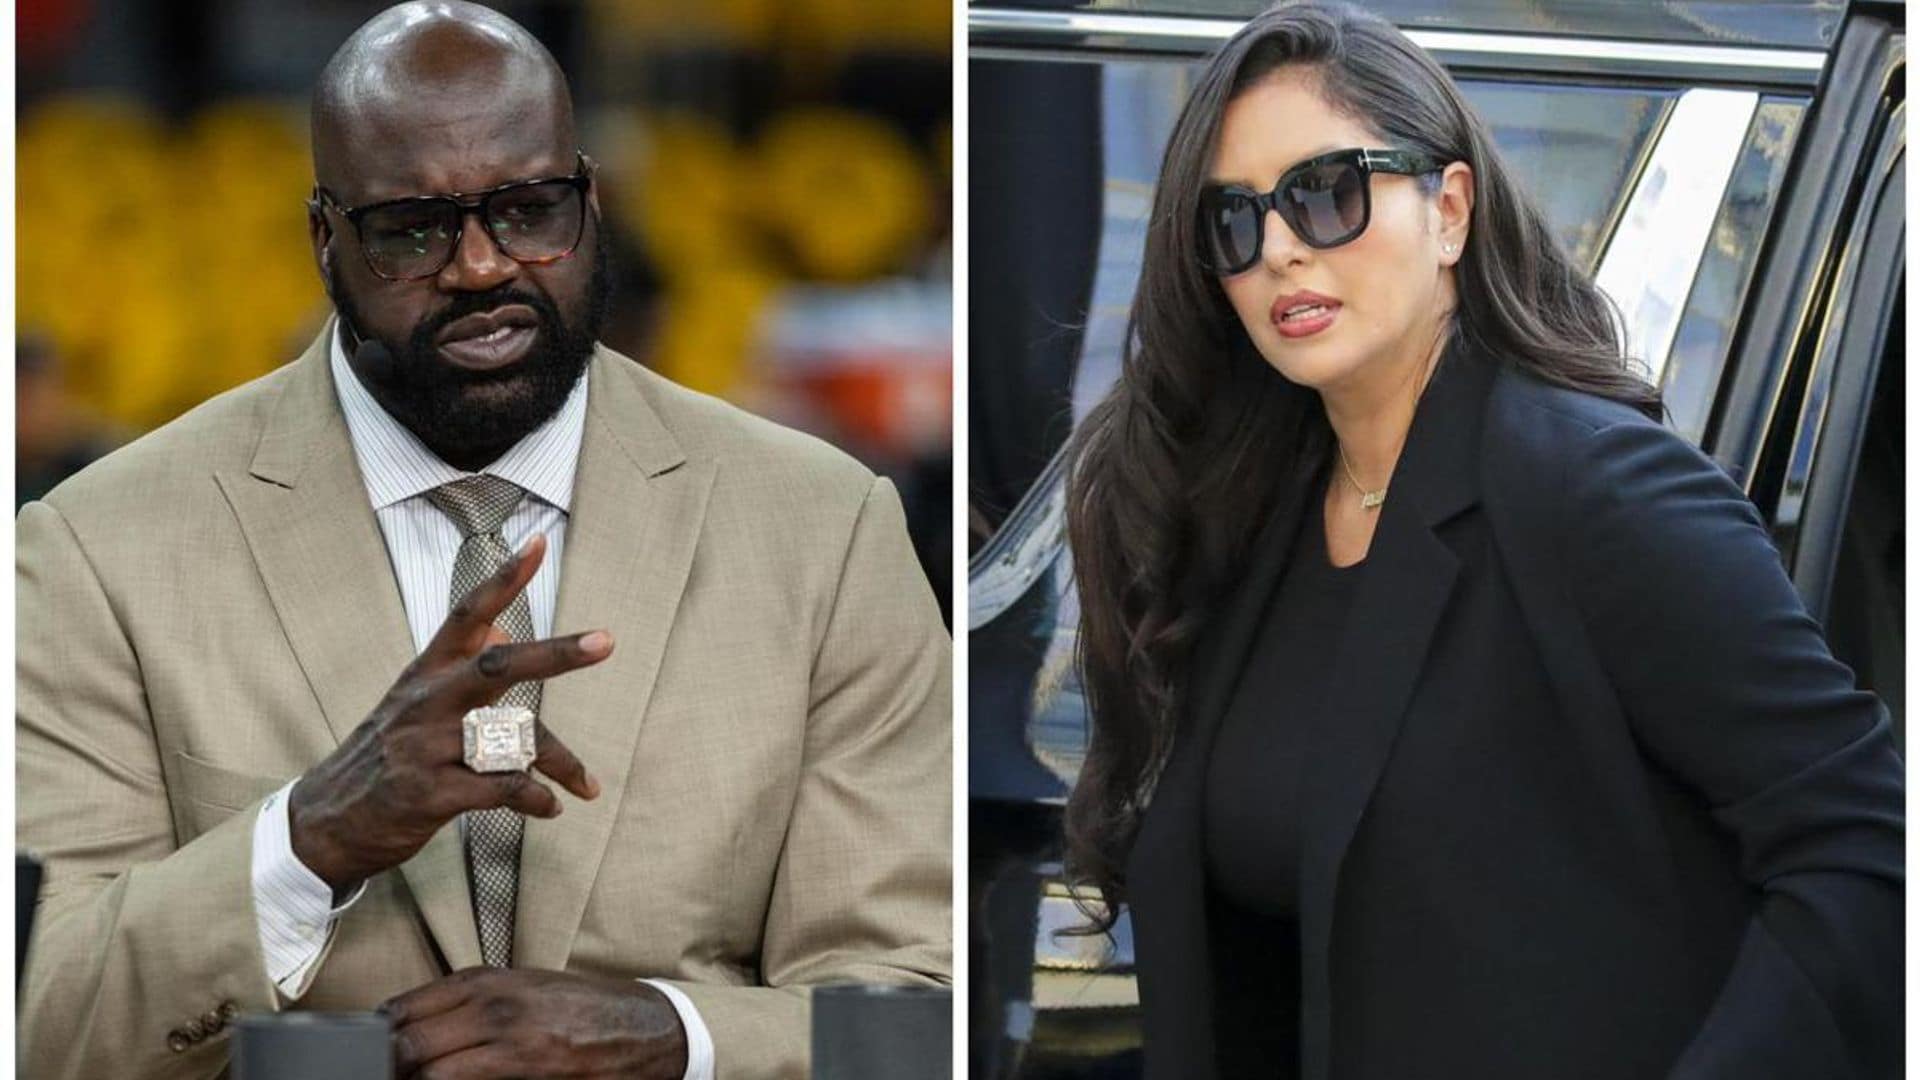 Shaquille O'Neal supports Vanessa Bryant for trying to make people accountable